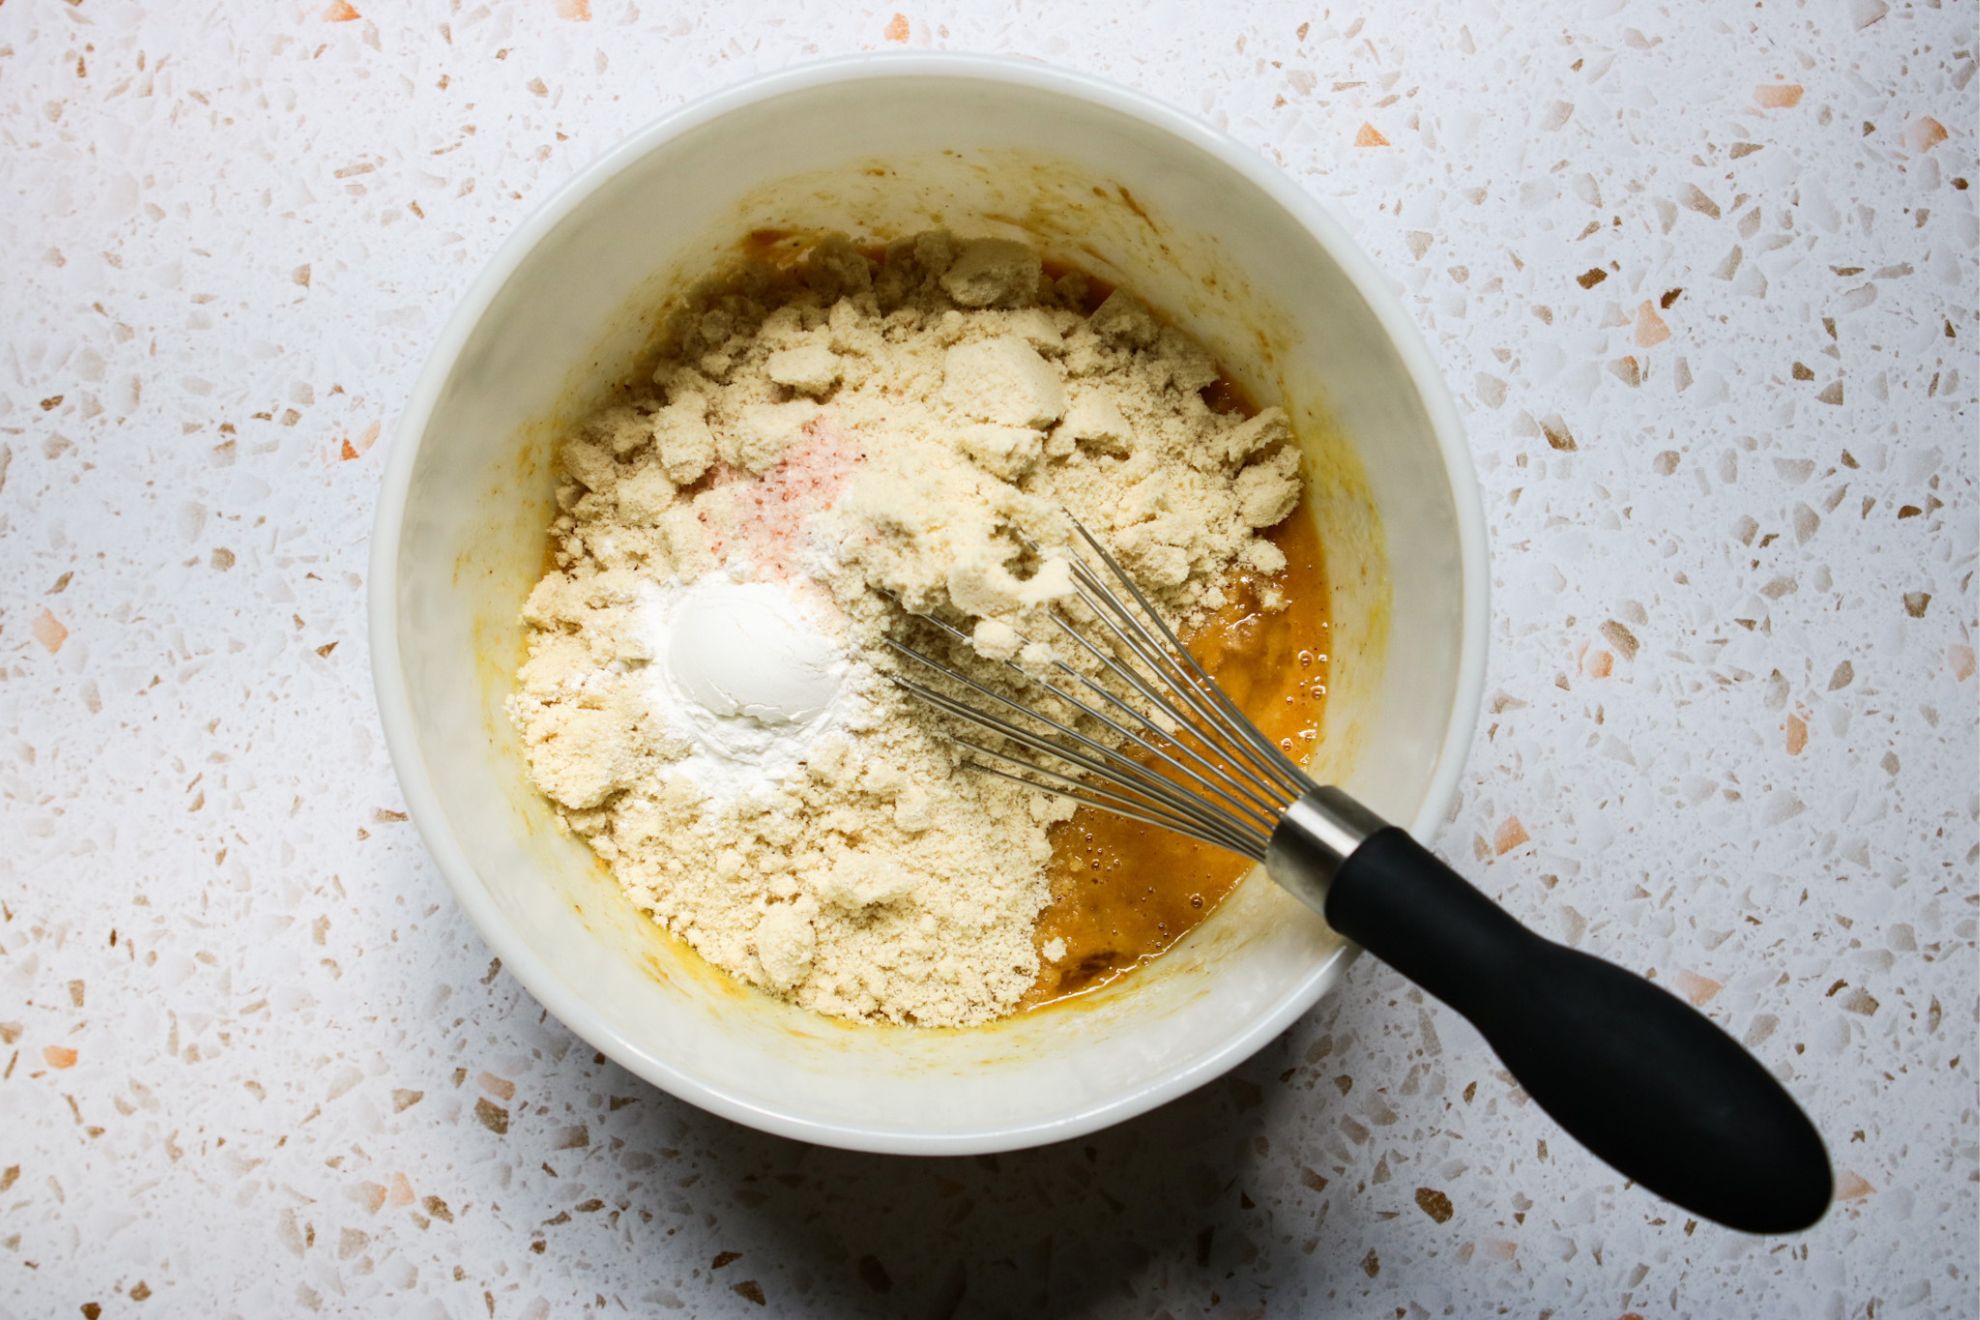 This is an overhead horizontal image of a large white bowl with peanut butter colored mixture in it. On top of the wet mixture is blanched almond flour, a white power and pink salt. The bowl is centered in the middle of the image on a white, beige and peach terrazzo surface. A whisk with a black rubber handle is in the bowl with the handle leaning against the side of the bowl and pointing to the bottom right corner of the image.